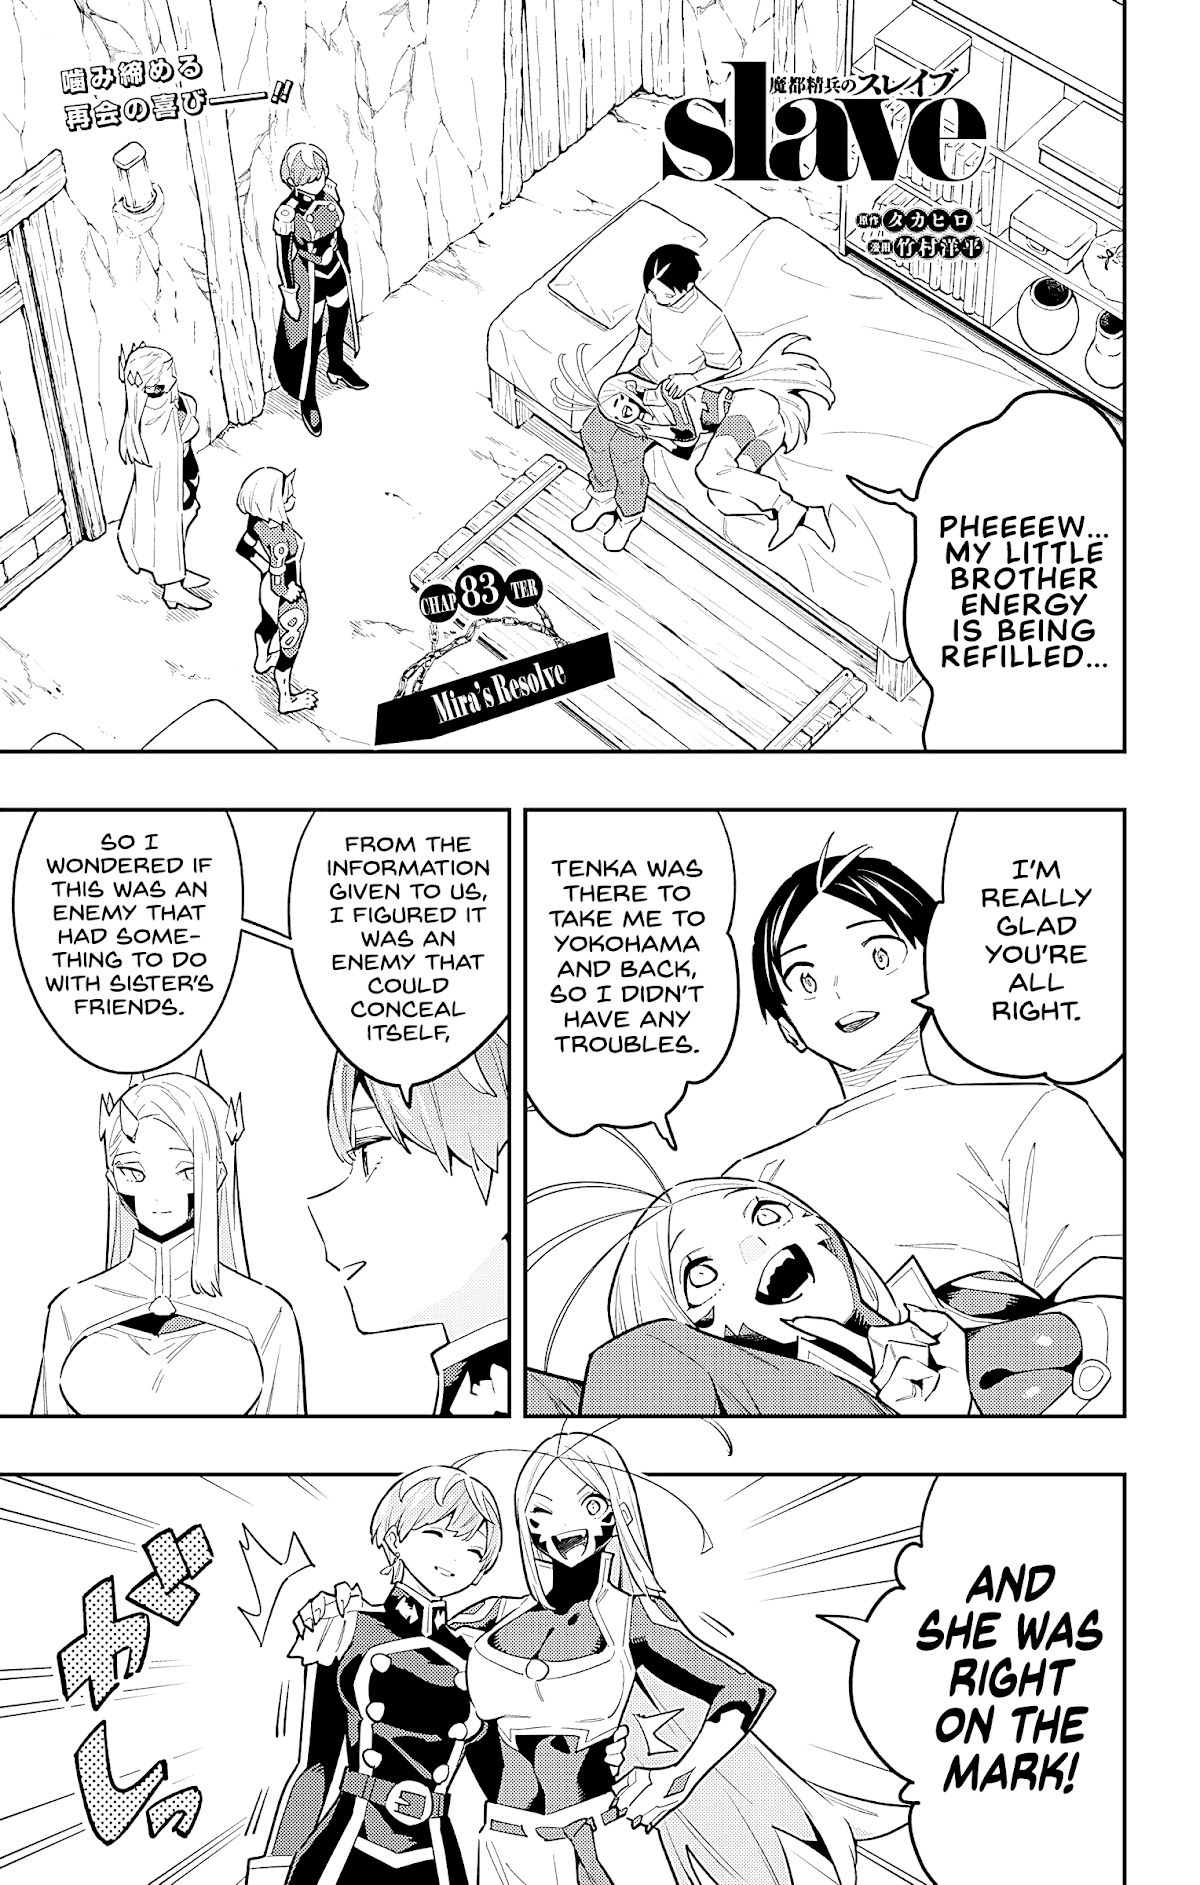 Slave Of The Magic Capital's Elite Troops - Page 1